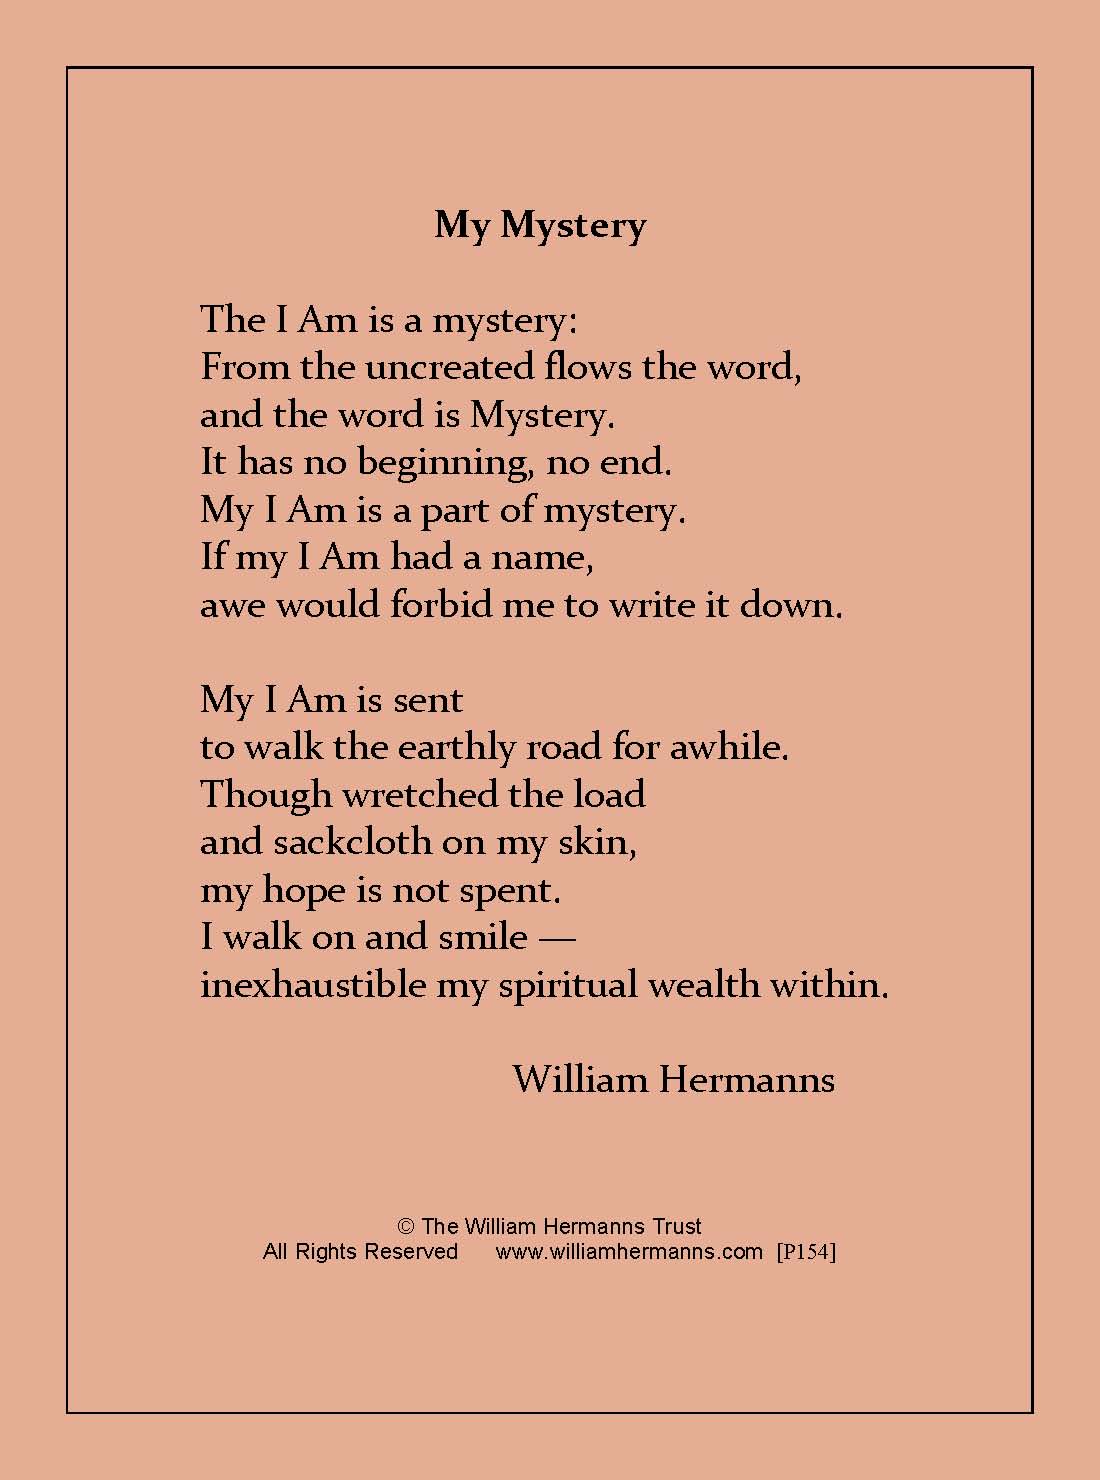 My Mystery by William Hermanns